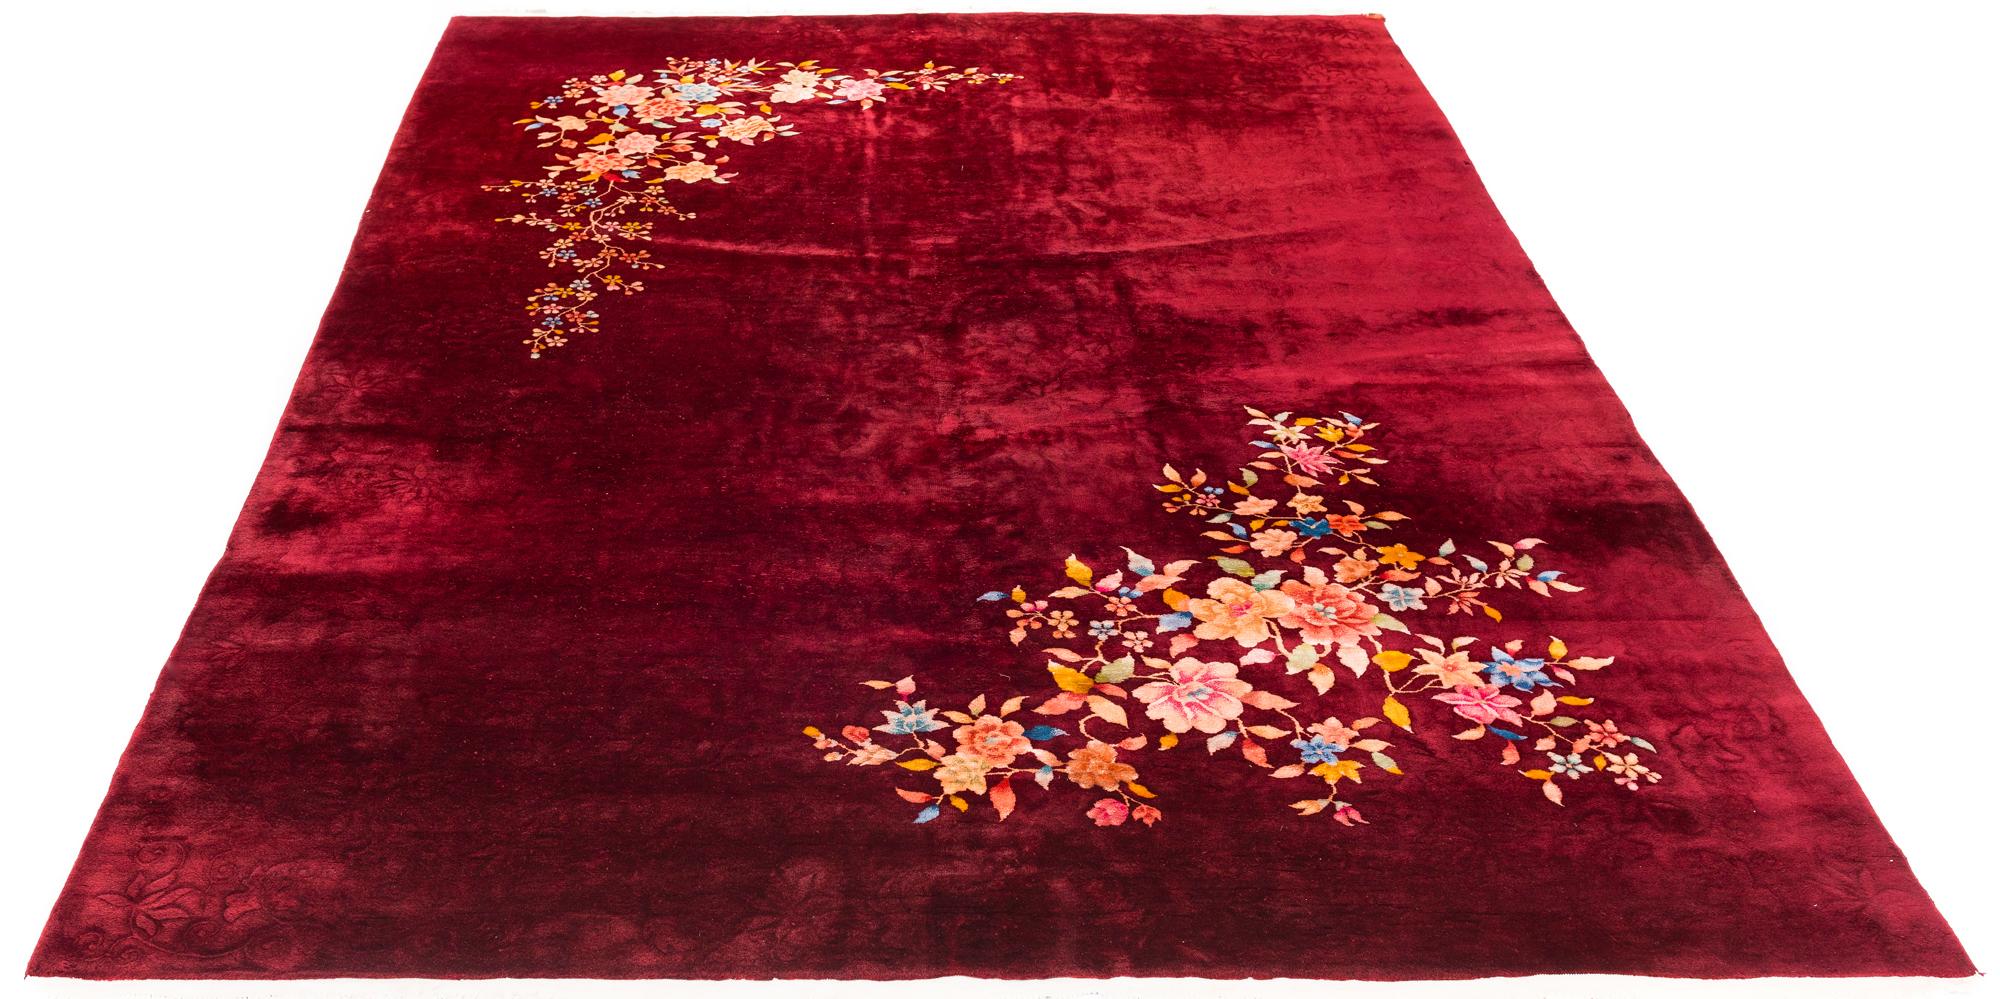 This Art Deco Nichols rug was woven in China in the first few decades of the 20th century. Rugs of this style began to usurp the more traditional Chinese designs during the 1910s and 20s. The result was some of the most iconic and eye-catching